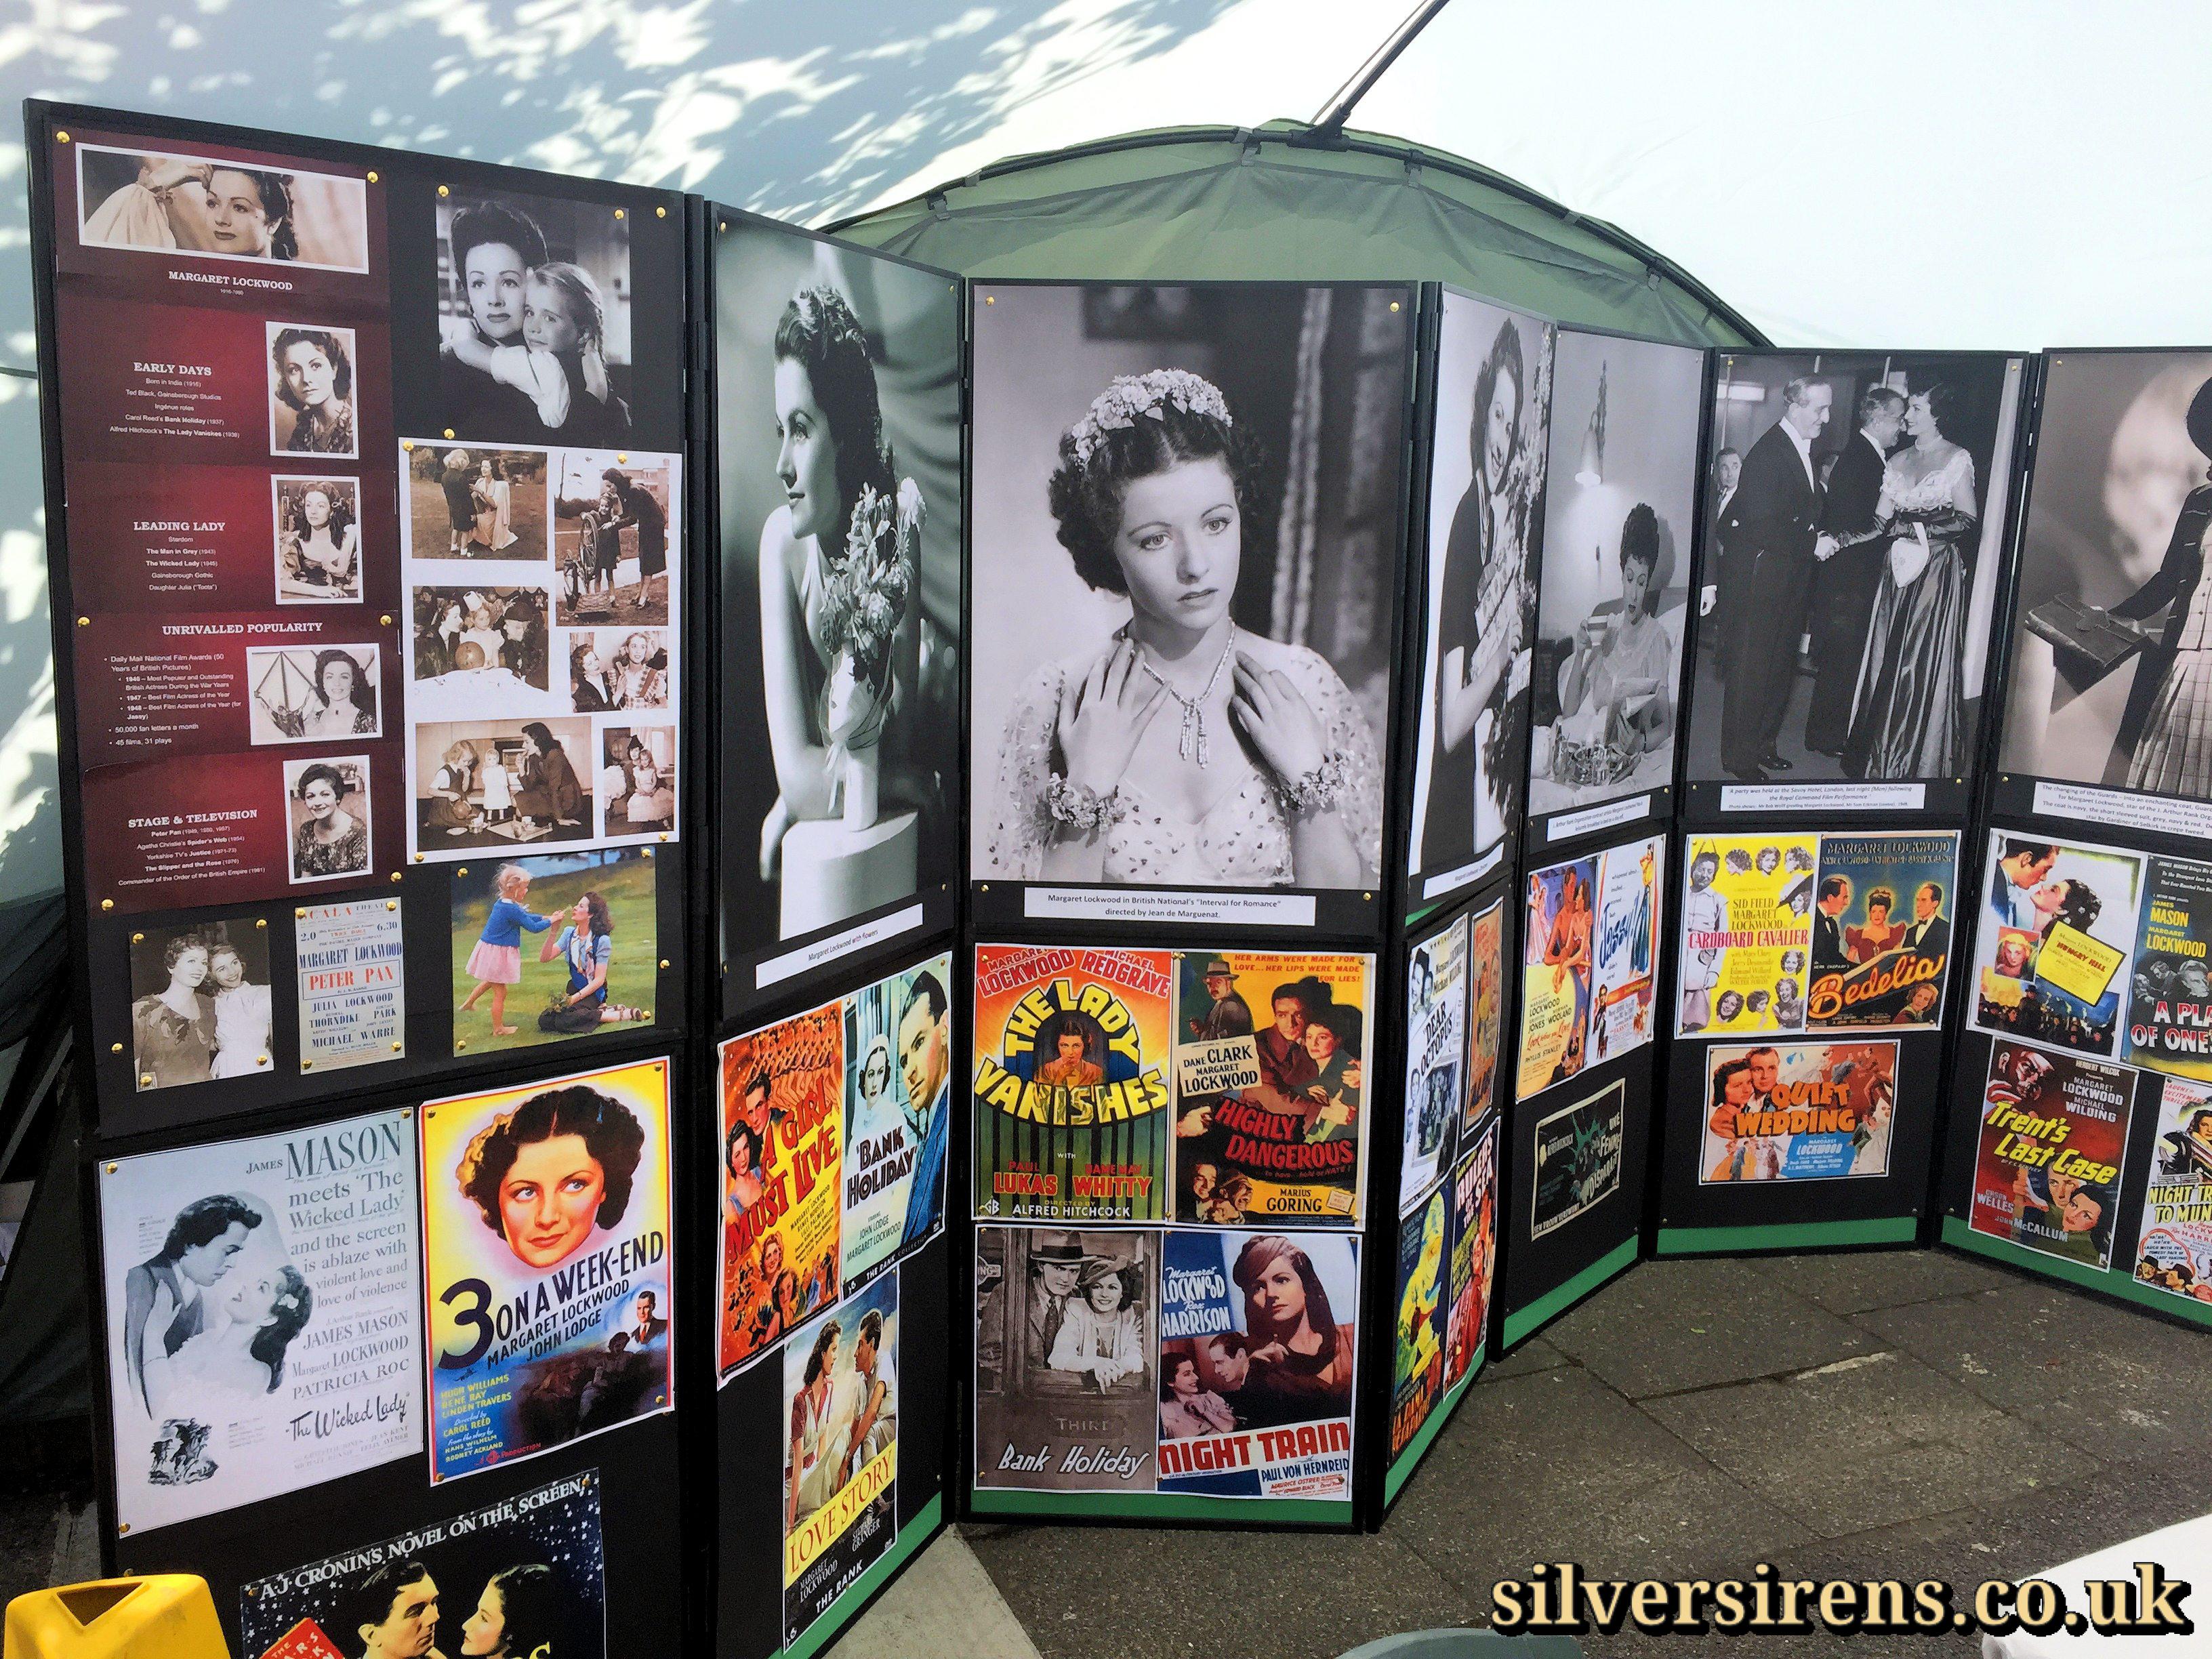 Margaret Lockwood blue plaque exhibition marquee, featuring photos, lobby cards and posters from the actress’s extensive film career